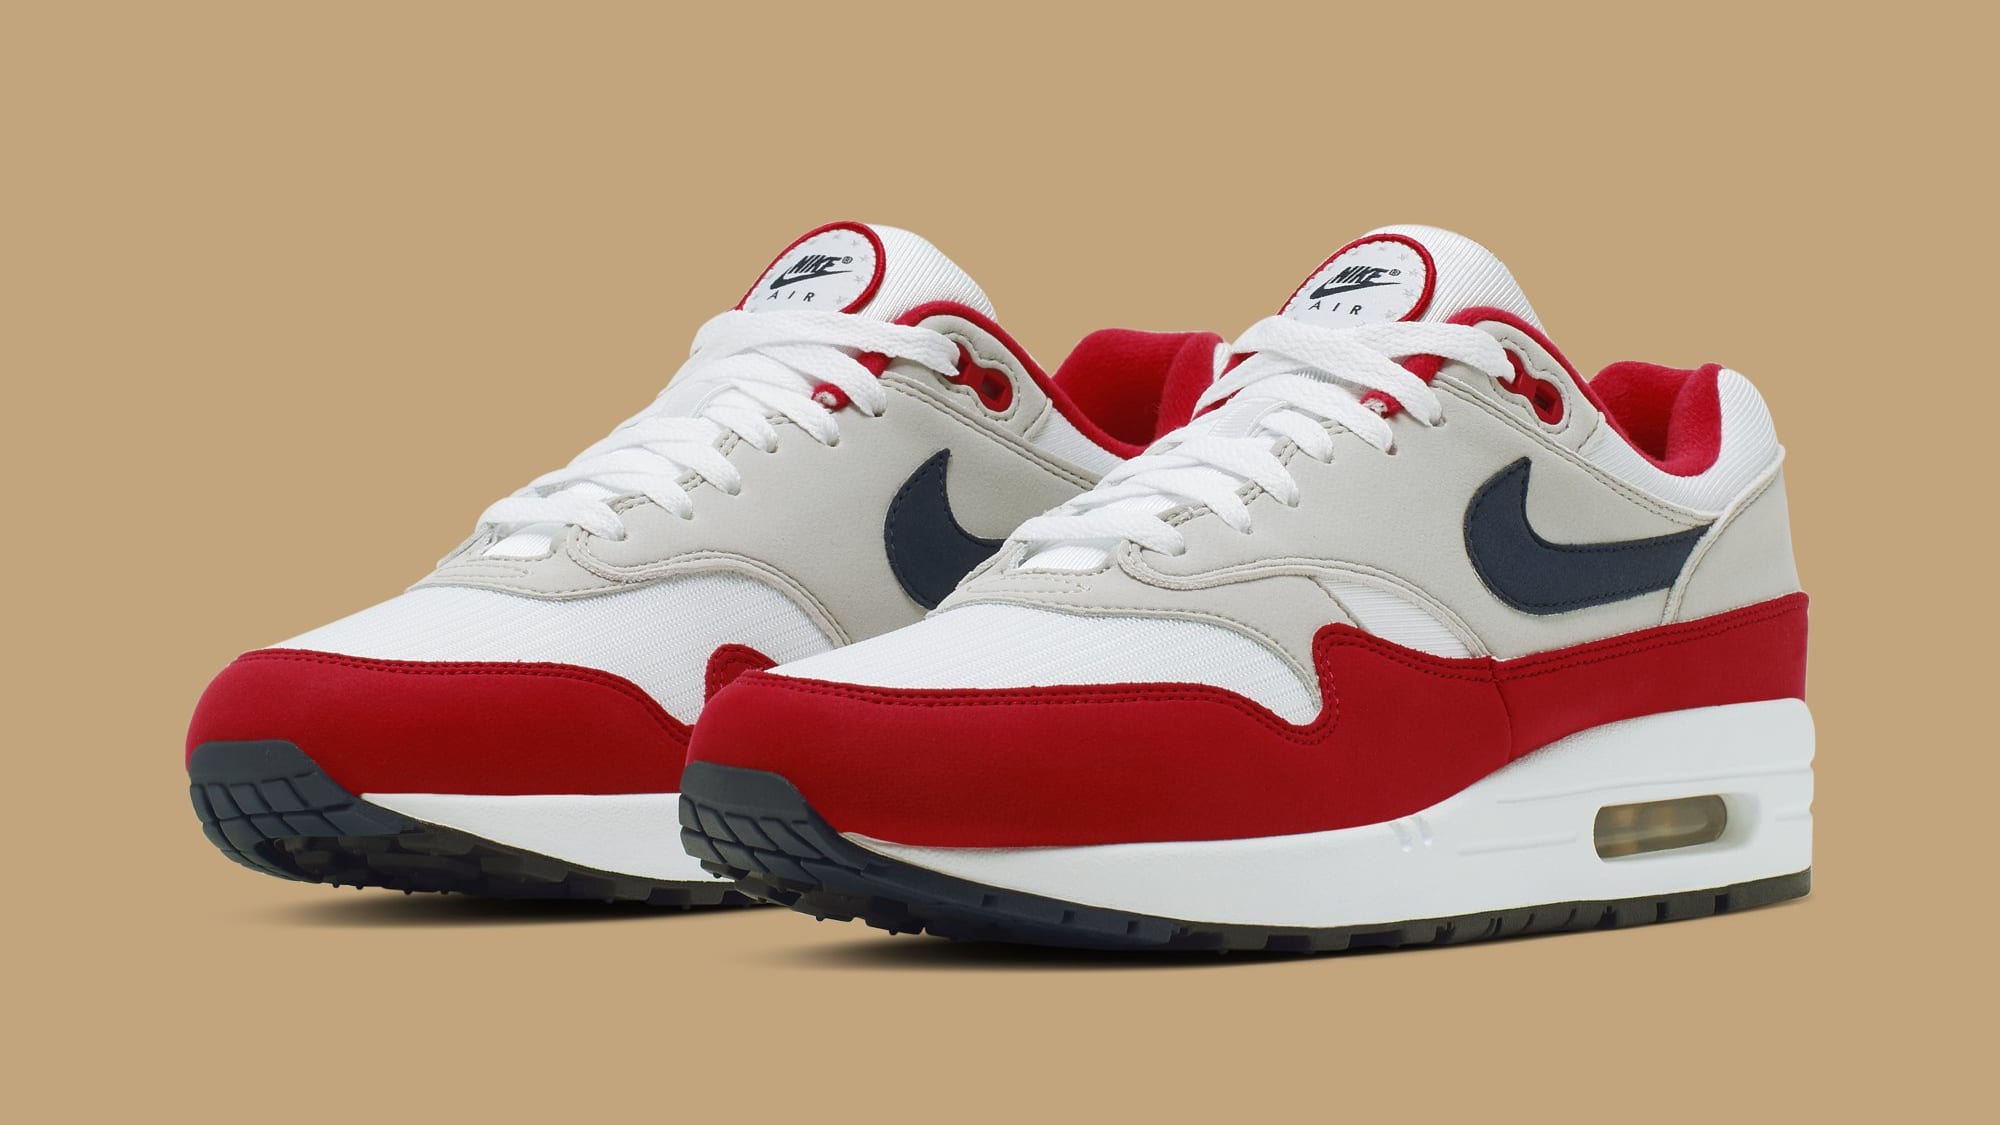 Colin Made Nike Cancel This 'Fourth of July' Sneaker | Complex